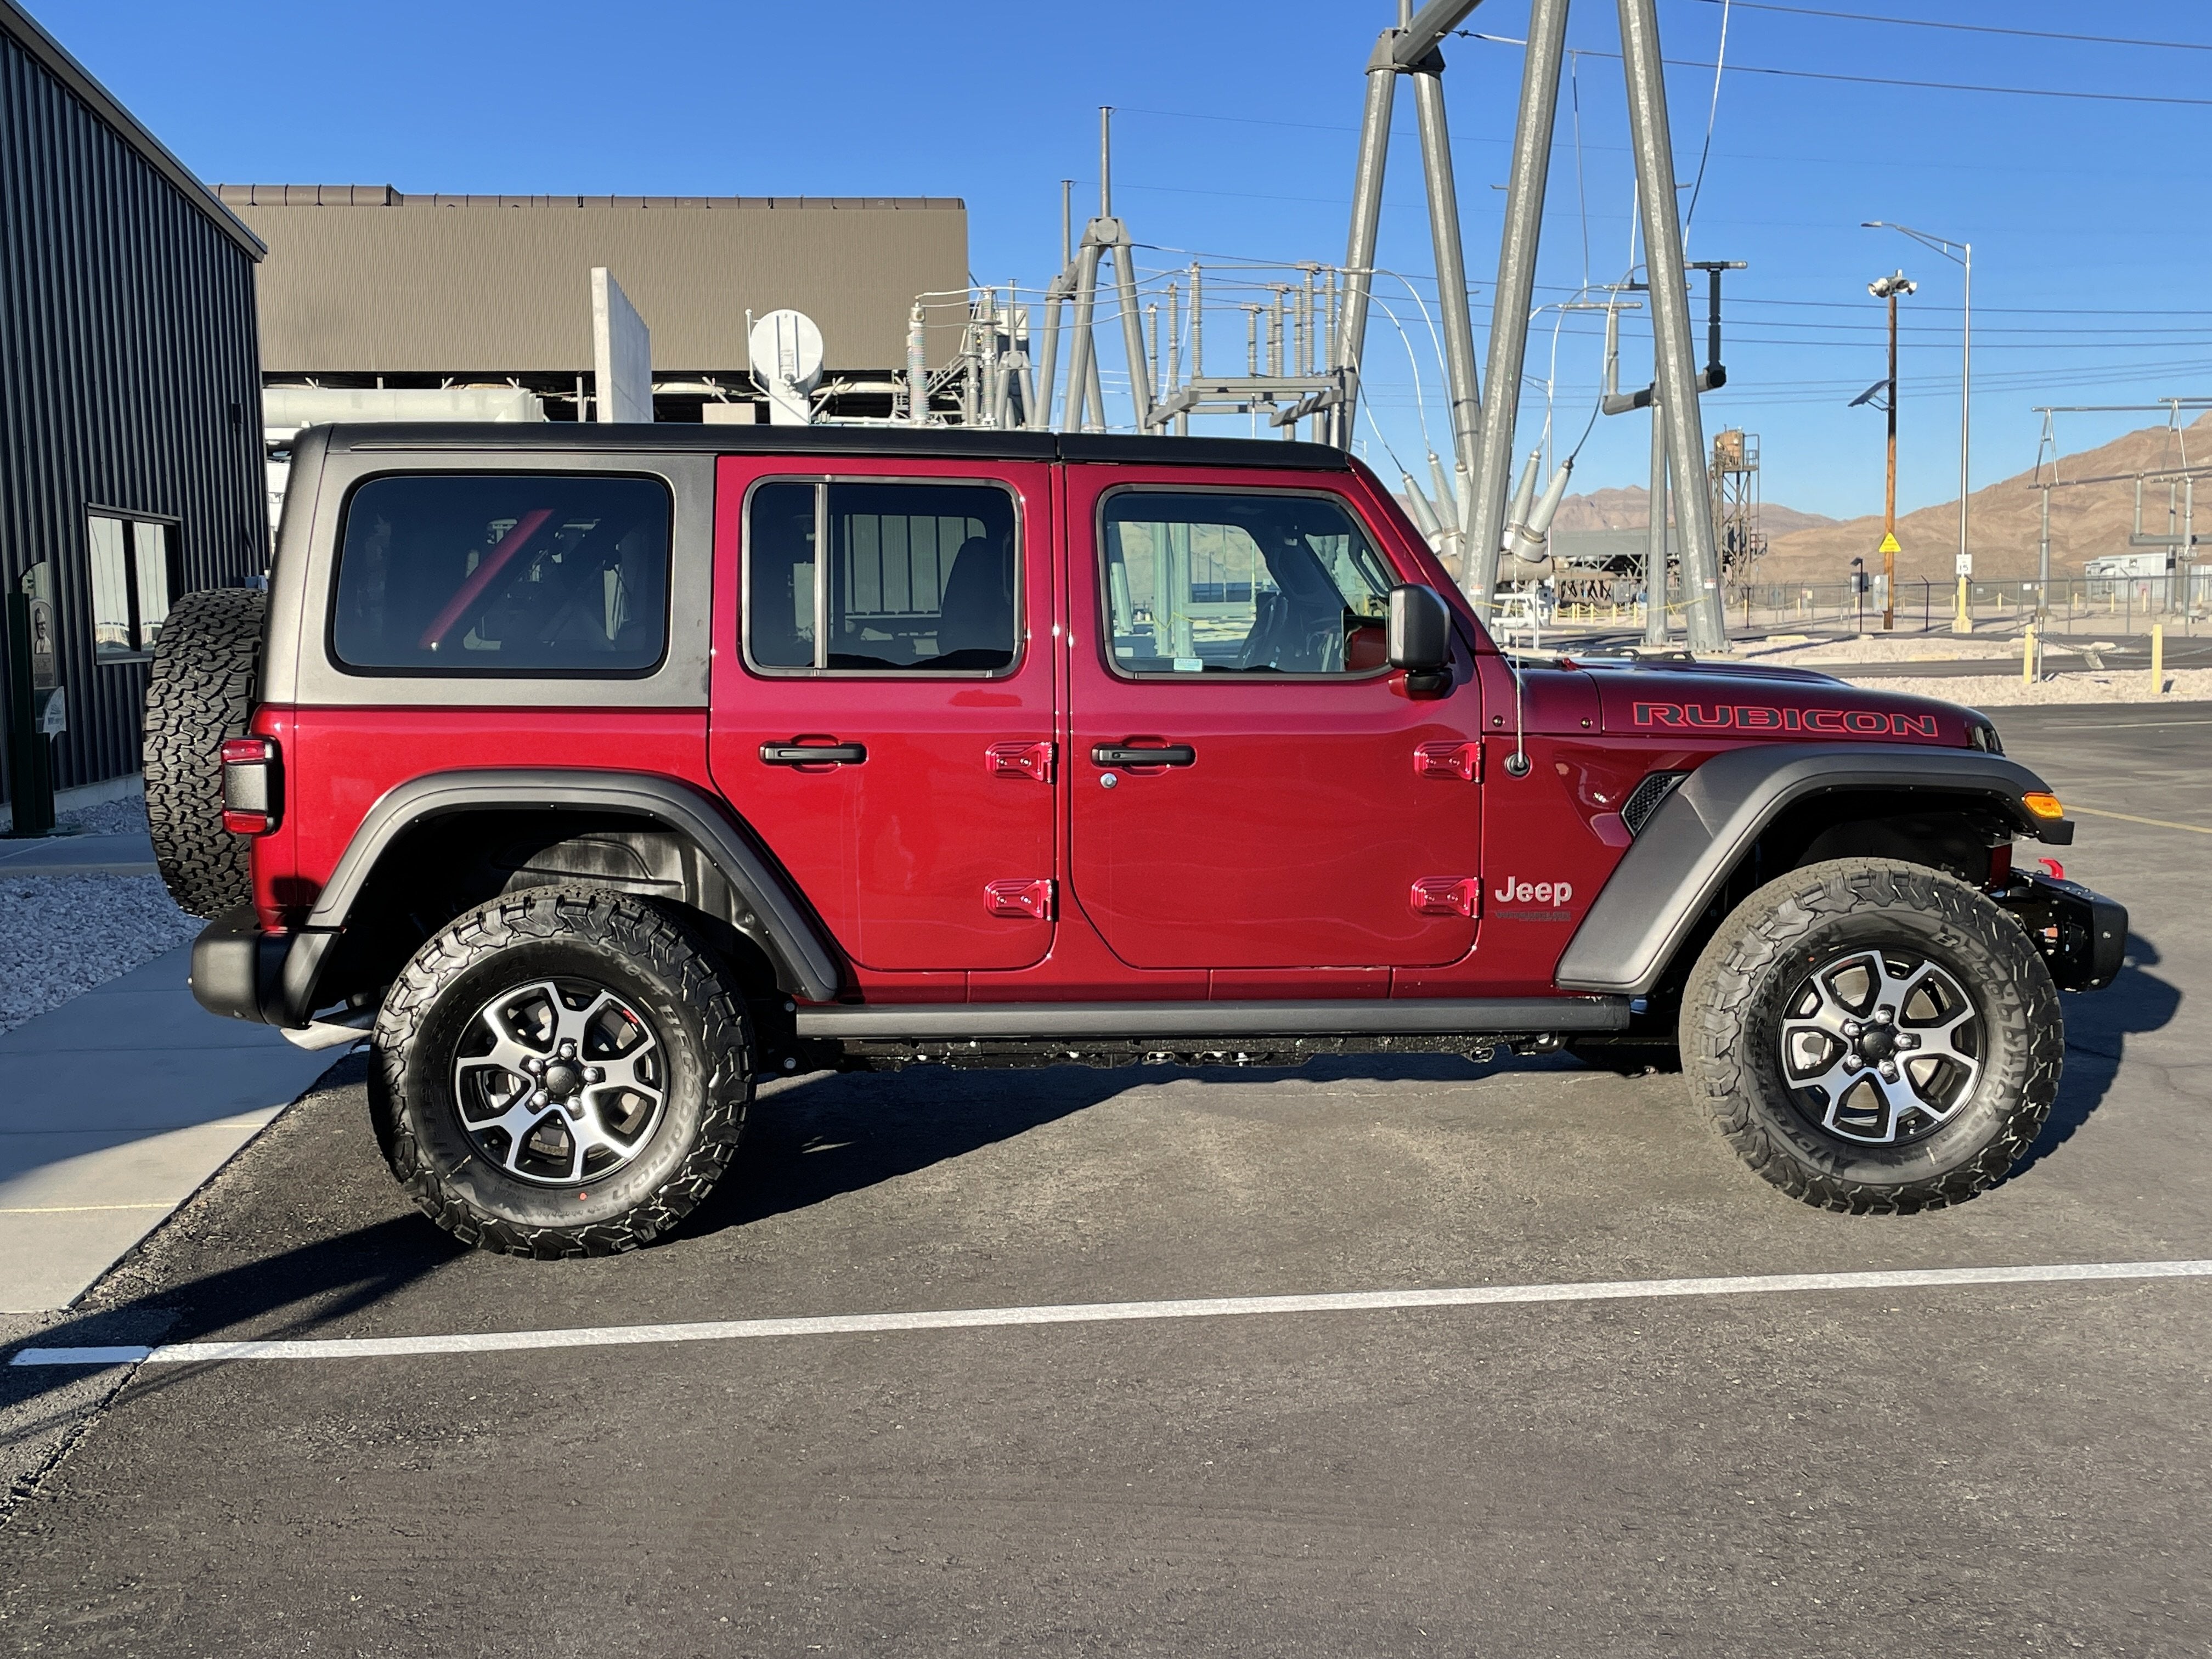 Snazzberry Availability for New Orders | Jeep Wrangler Forum